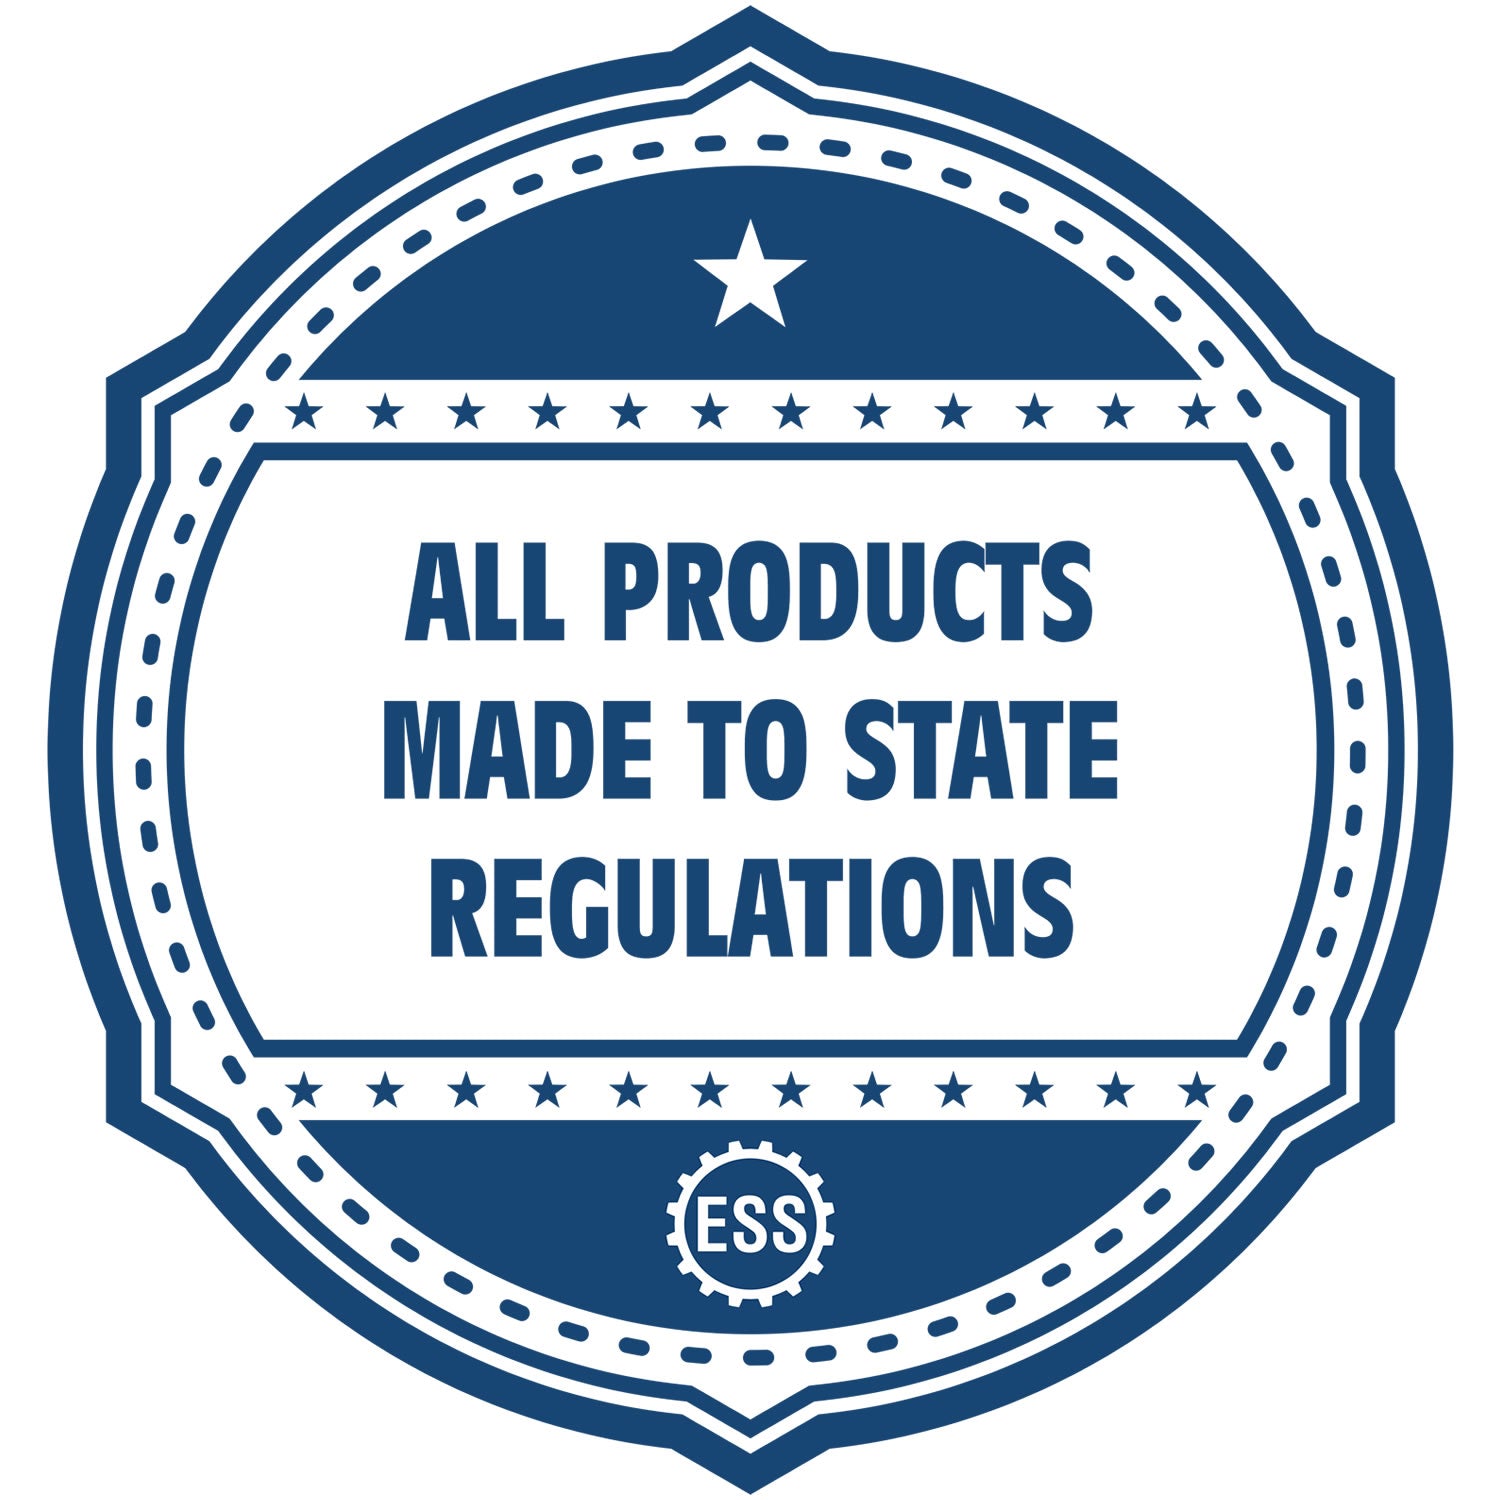 An icon or badge element for the Premium MaxLight Pre-Inked Connecticut Landscape Architectural Stamp showing that this product is made in compliance with state regulations.